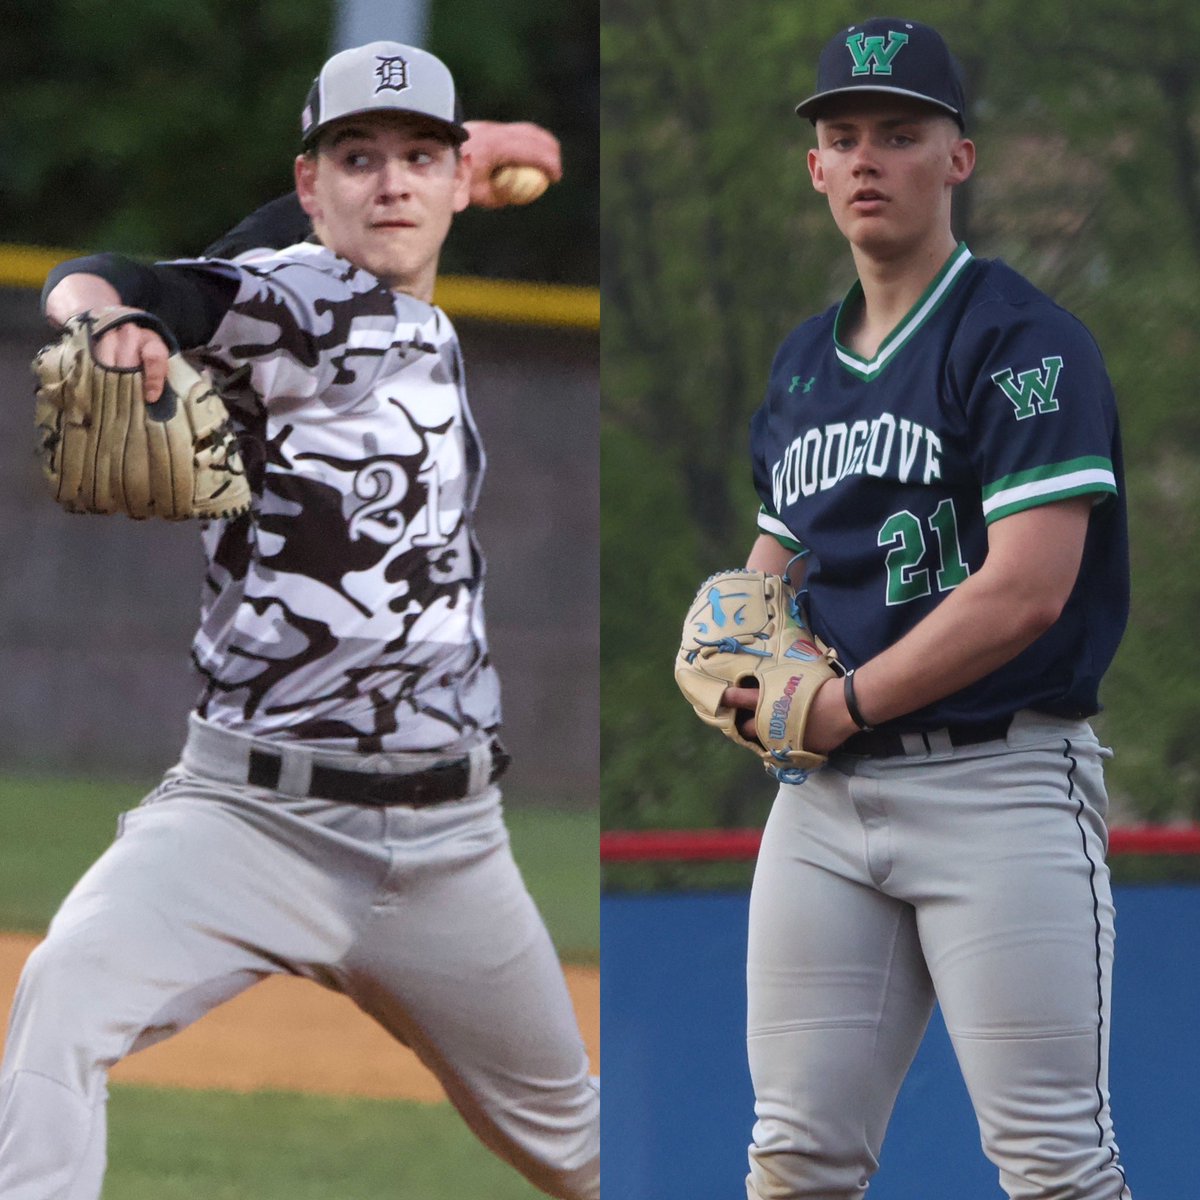 BURG Sports followers, We would like to congratulate two high school baseball players, Dominion’s Cayden Suchy who threw his second no-hitter of the season, and Woodgrove’s Caleb Fletcher who threw a no hitter as well. Photo Credit & Copyright: @BURGSportsnet / Michael Ferrara